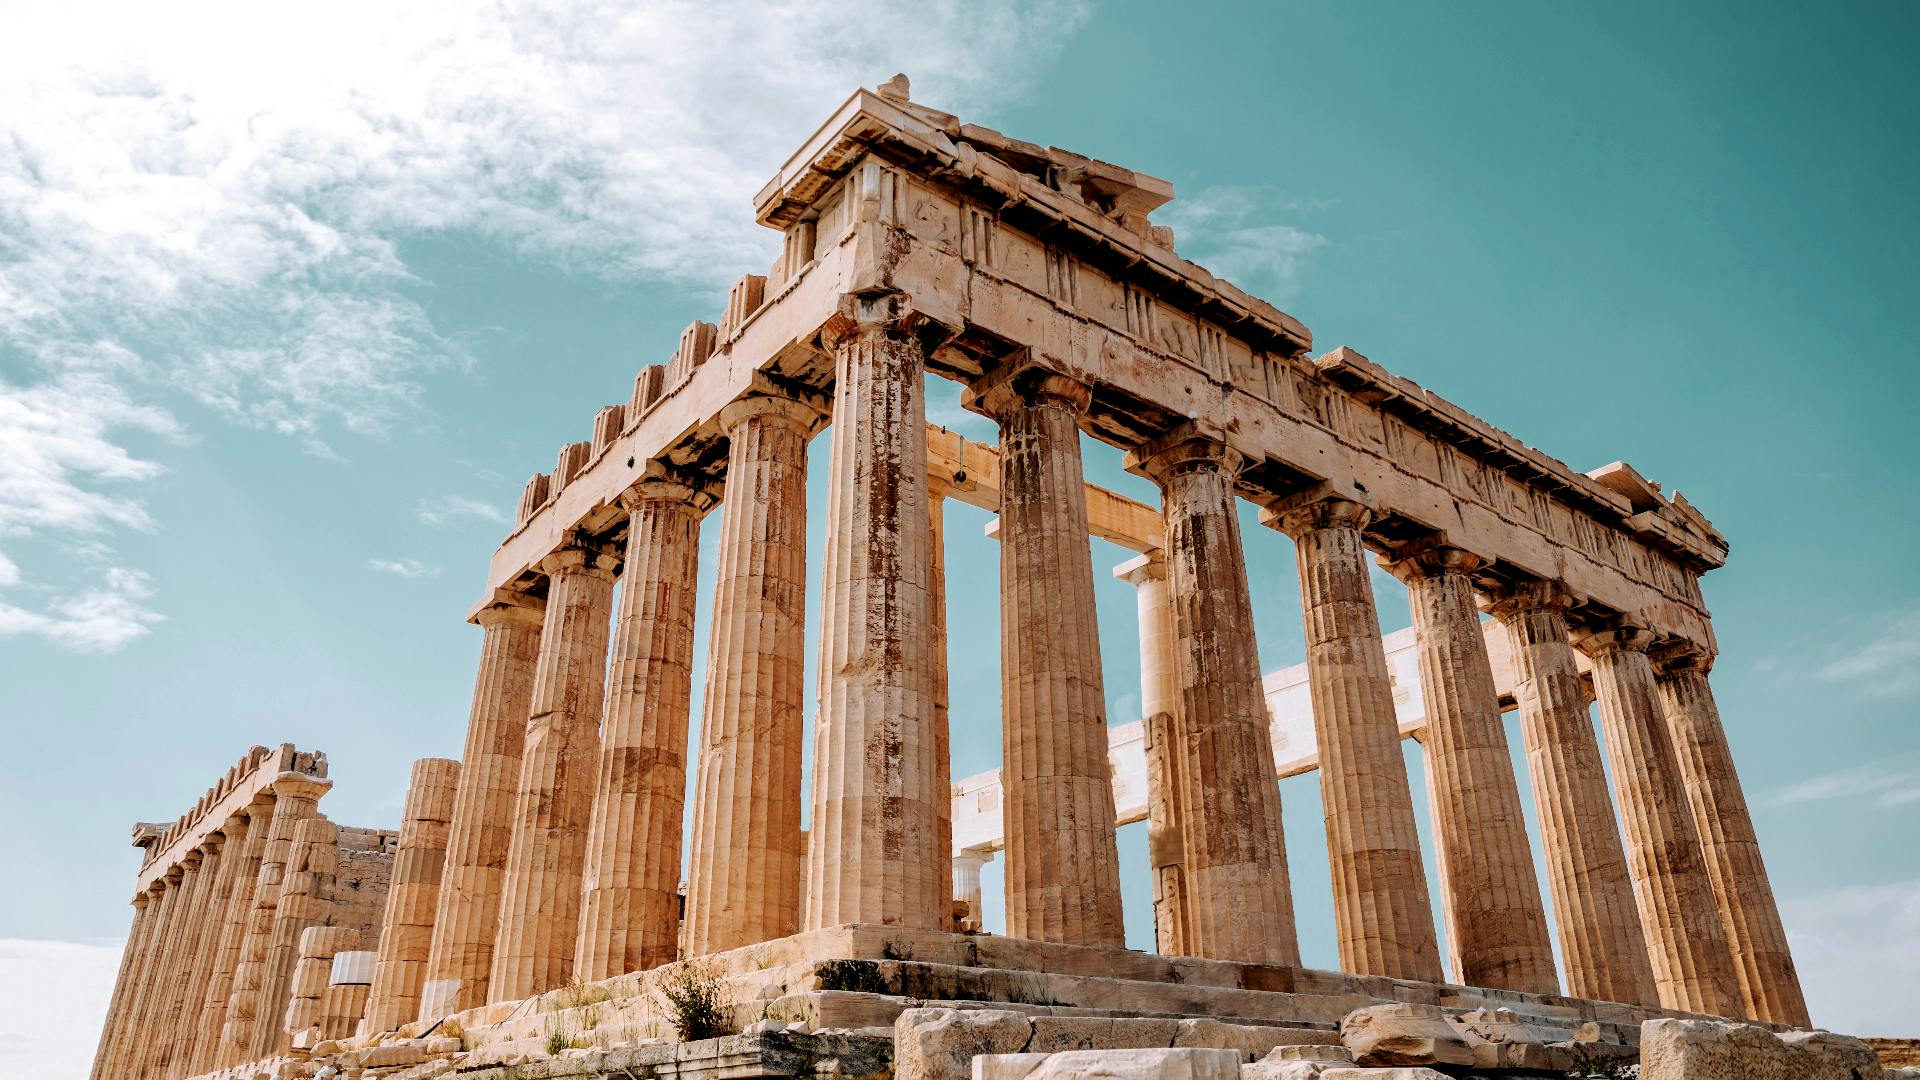 Self-guided Discovery Walk in Athens hidden gems and history